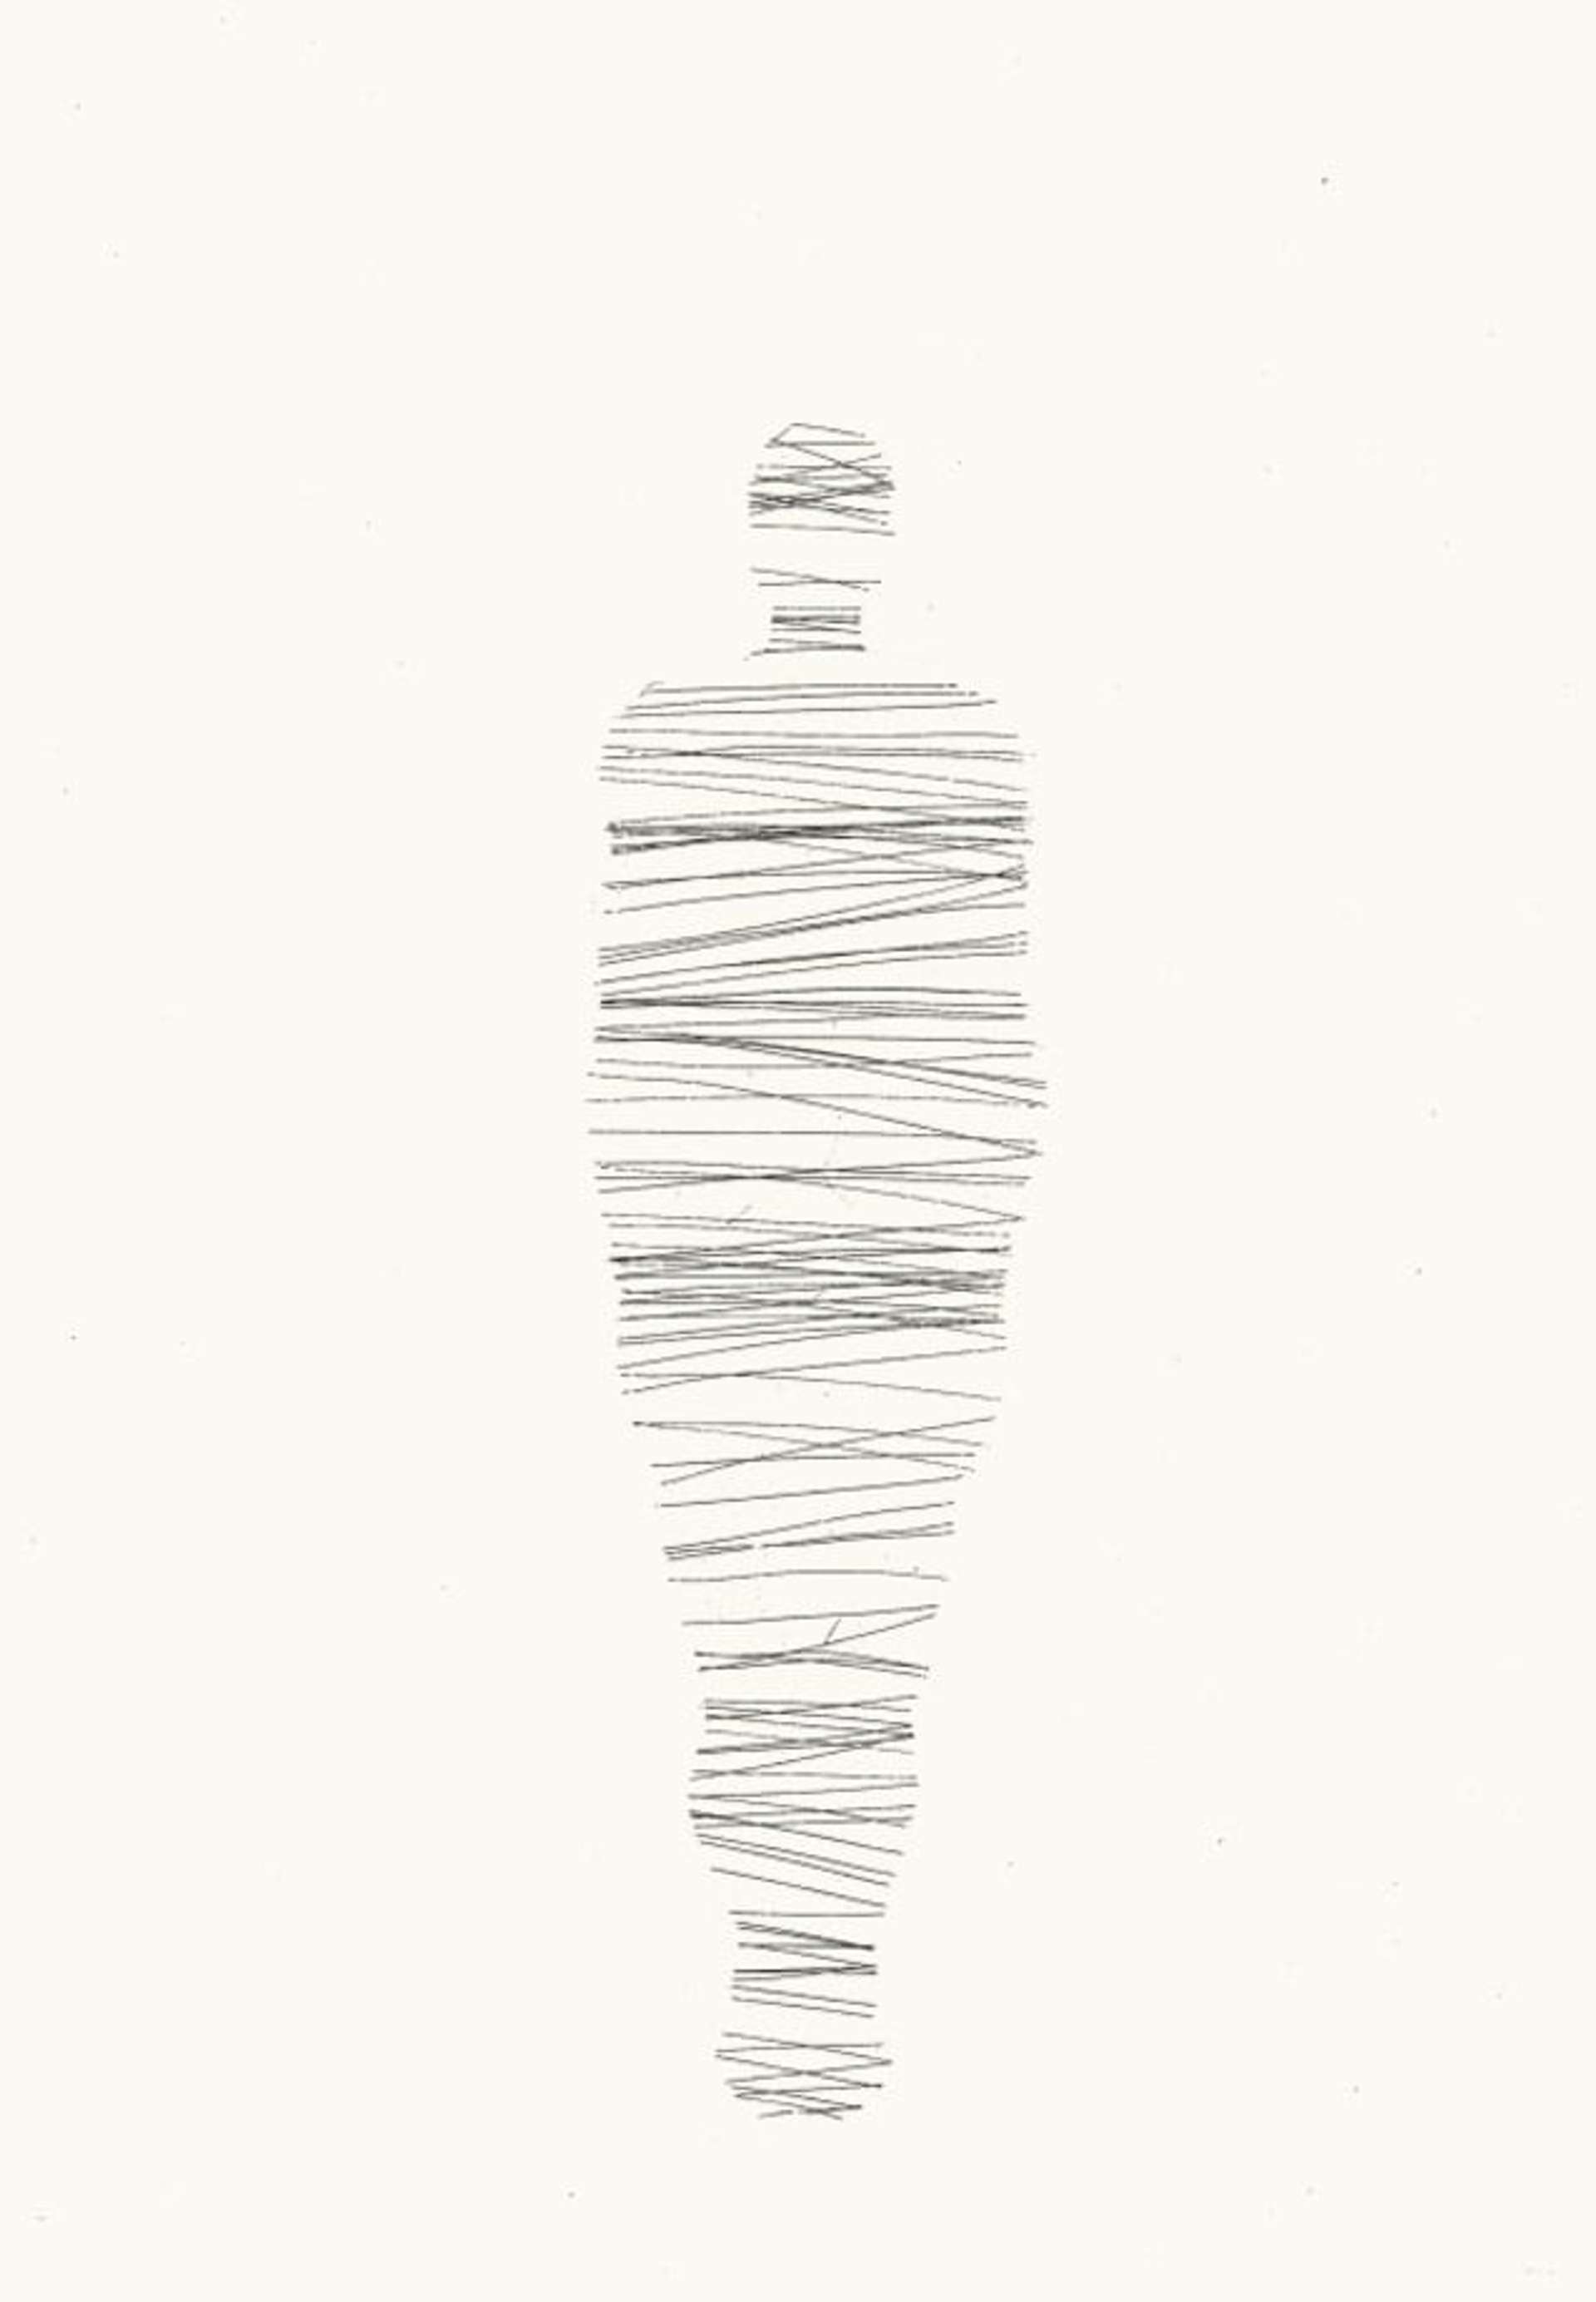 An image of the print Bind by Antony Gormley: a human silhouette drawn in straight black lines against a white background.